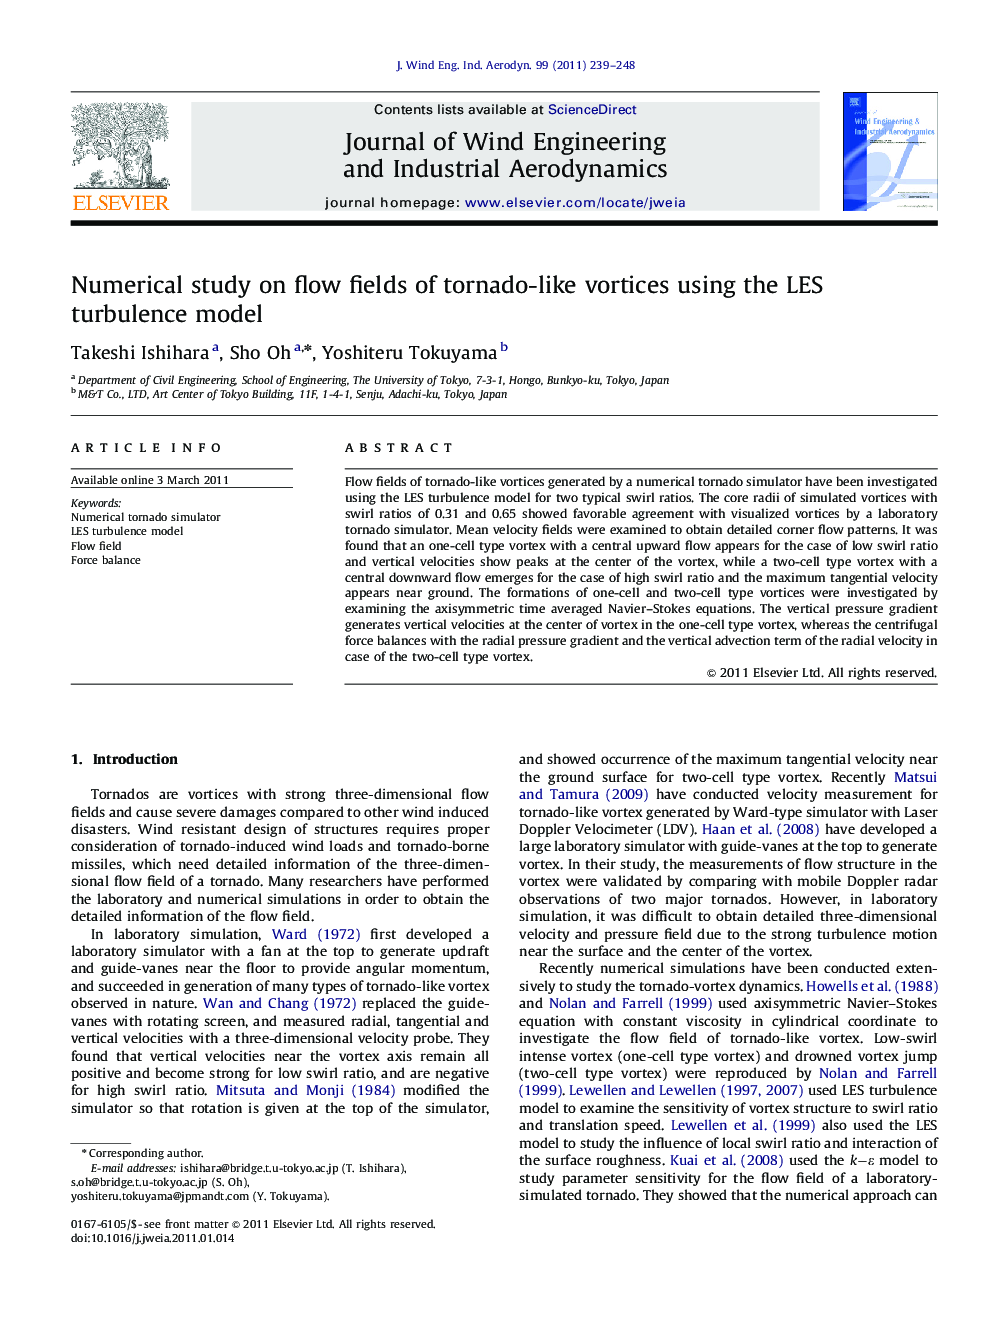 Numerical study on flow fields of tornado-like vortices using the LES turbulence model